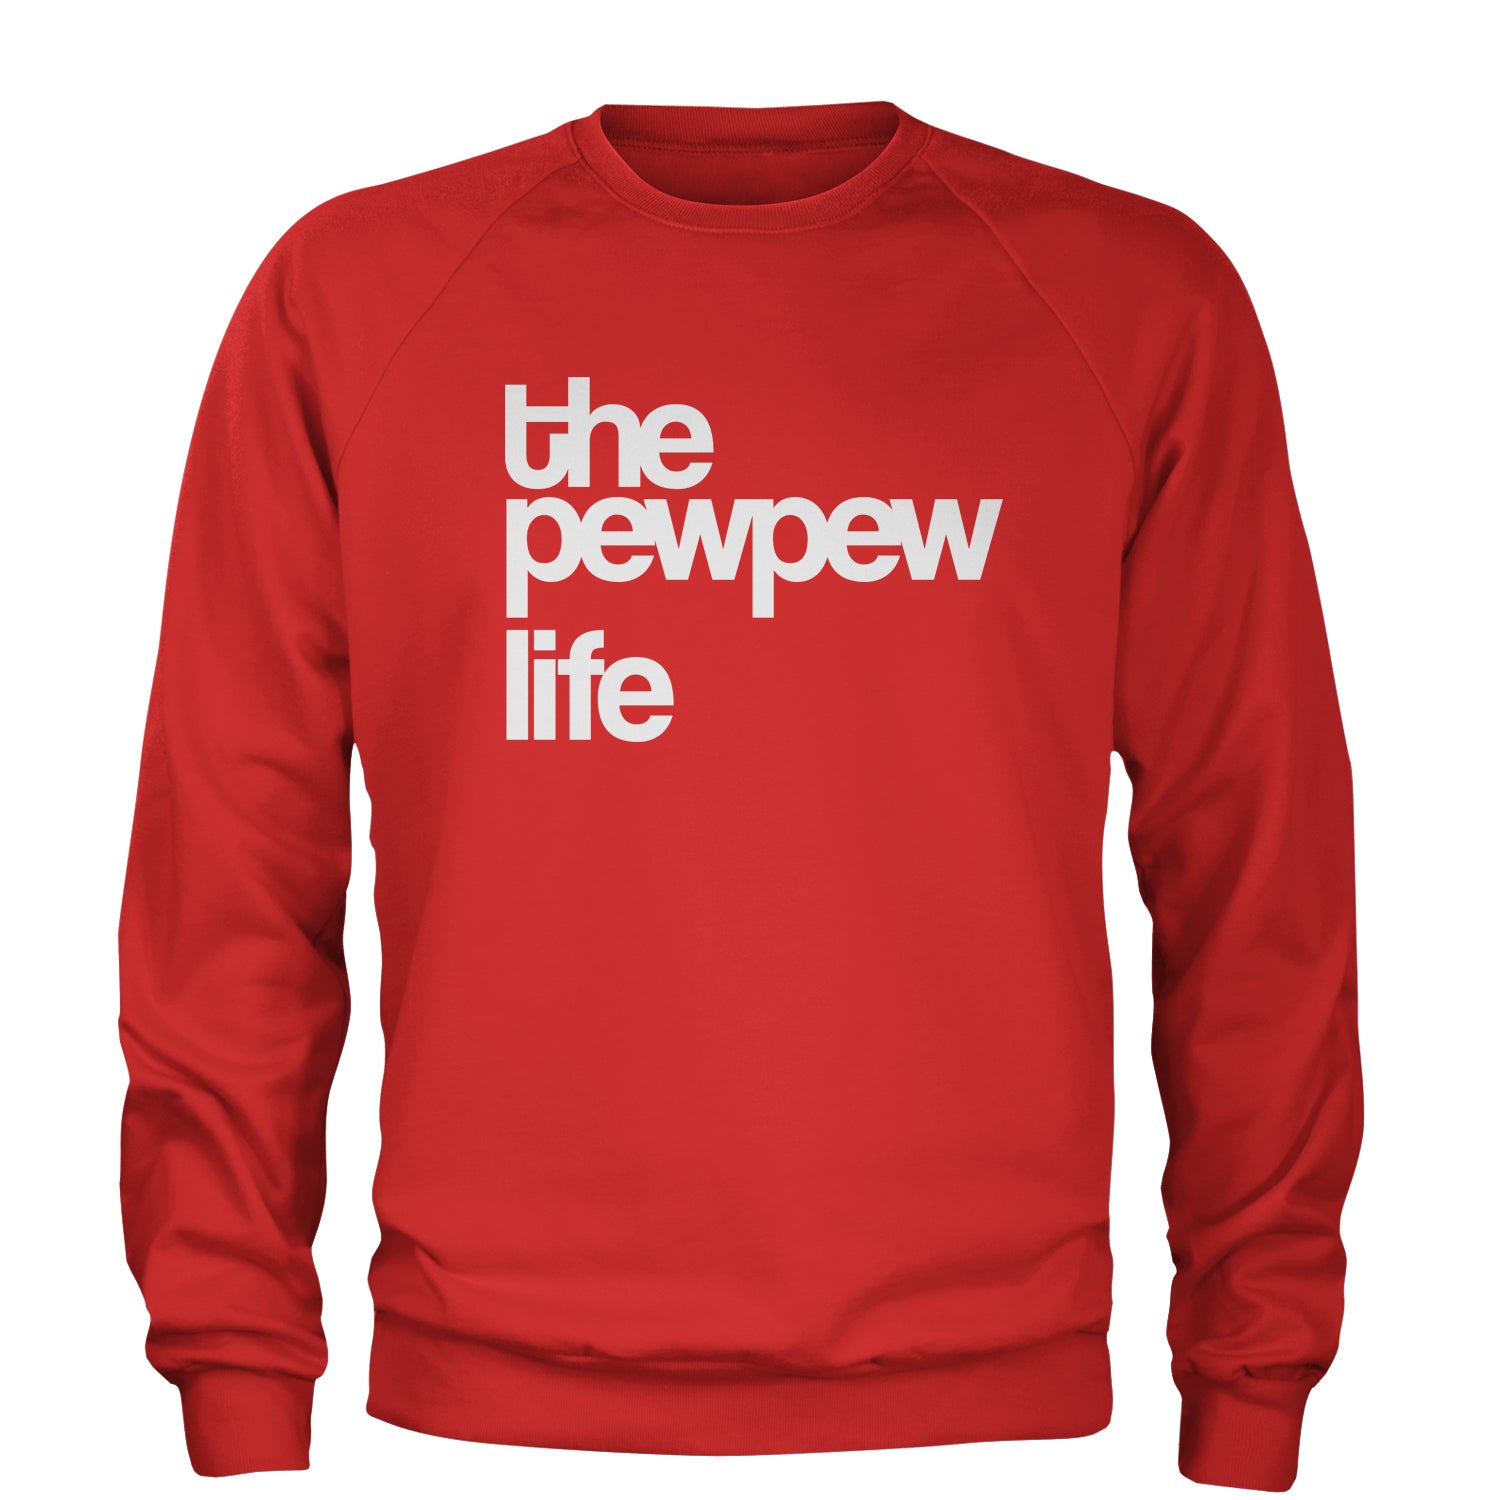 The PewPew Pew Pew Life Gun Rights Adult Crewneck Sweatshirt #expressiontees by Expression Tees